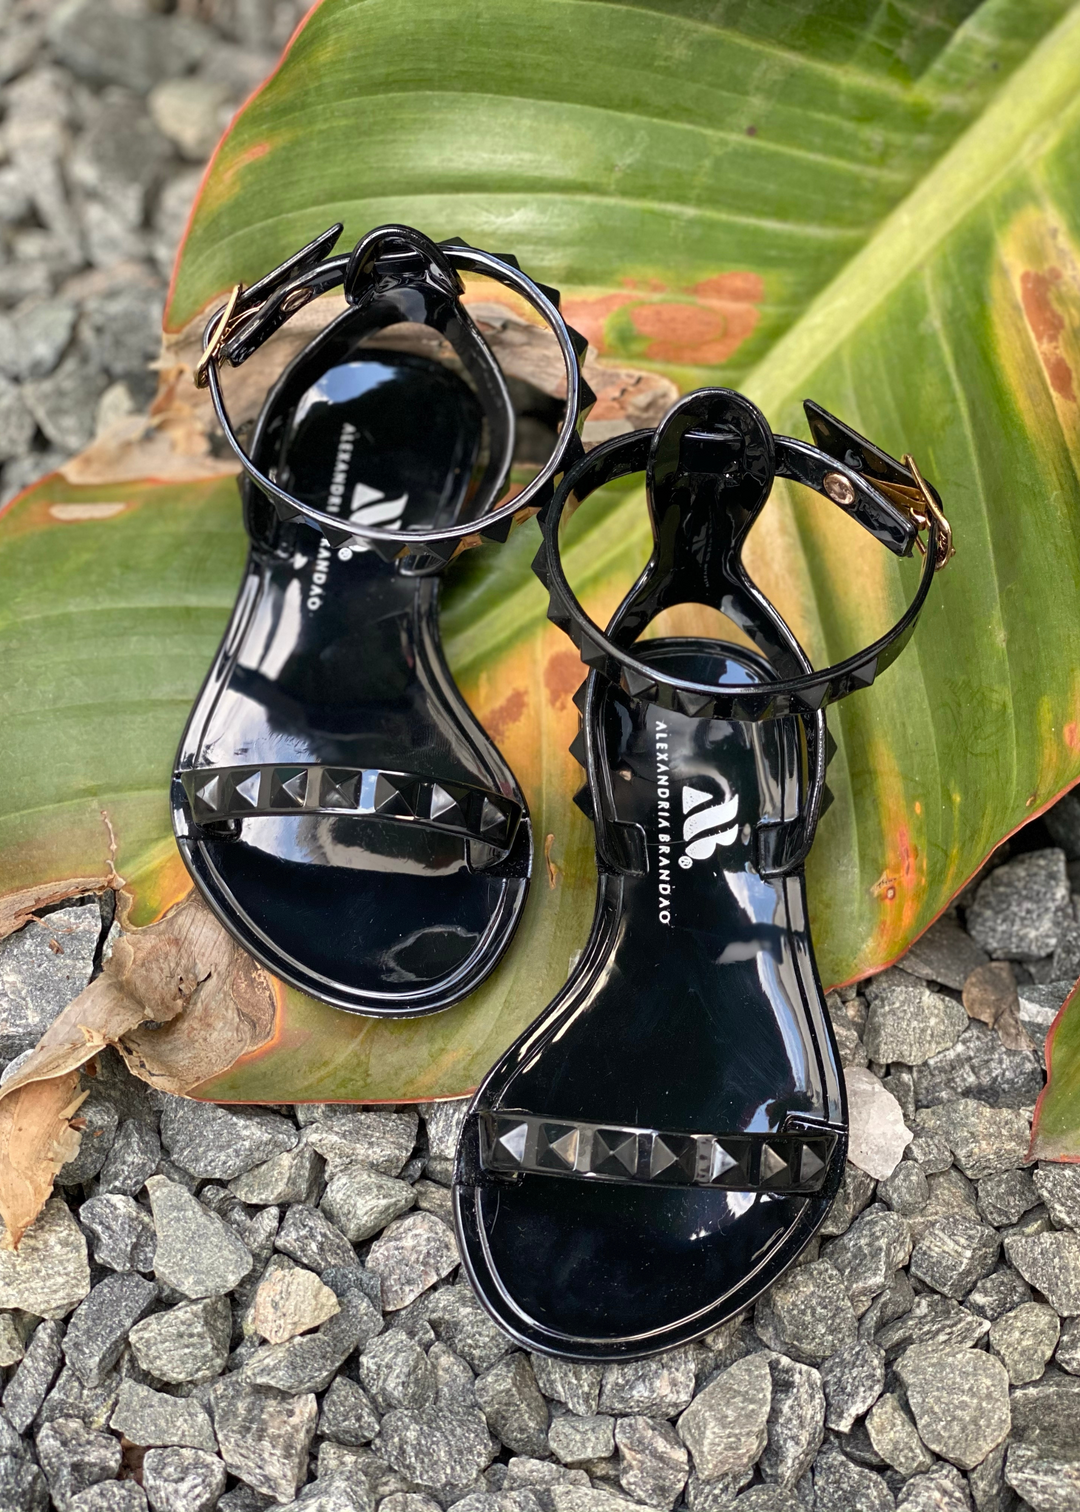 Kid's Aria Black Sandals with thin strap around the ankle this sandal is perfect for beach and pool days, you can wear them with a casual chic look